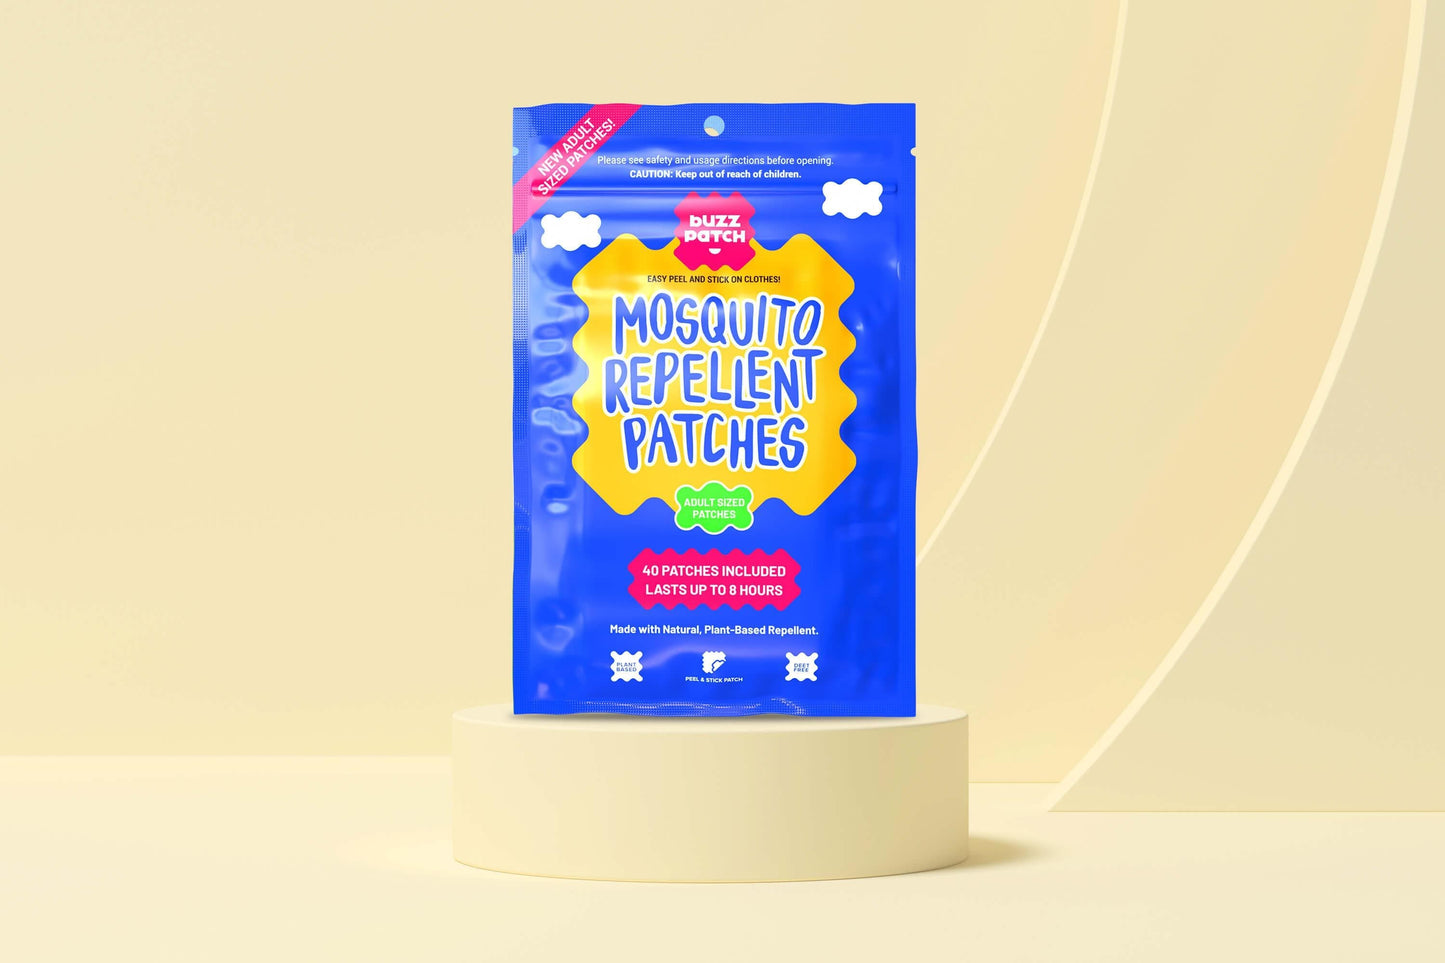 *Adult Sized BuzzPatch Mosquito Repellent Patches